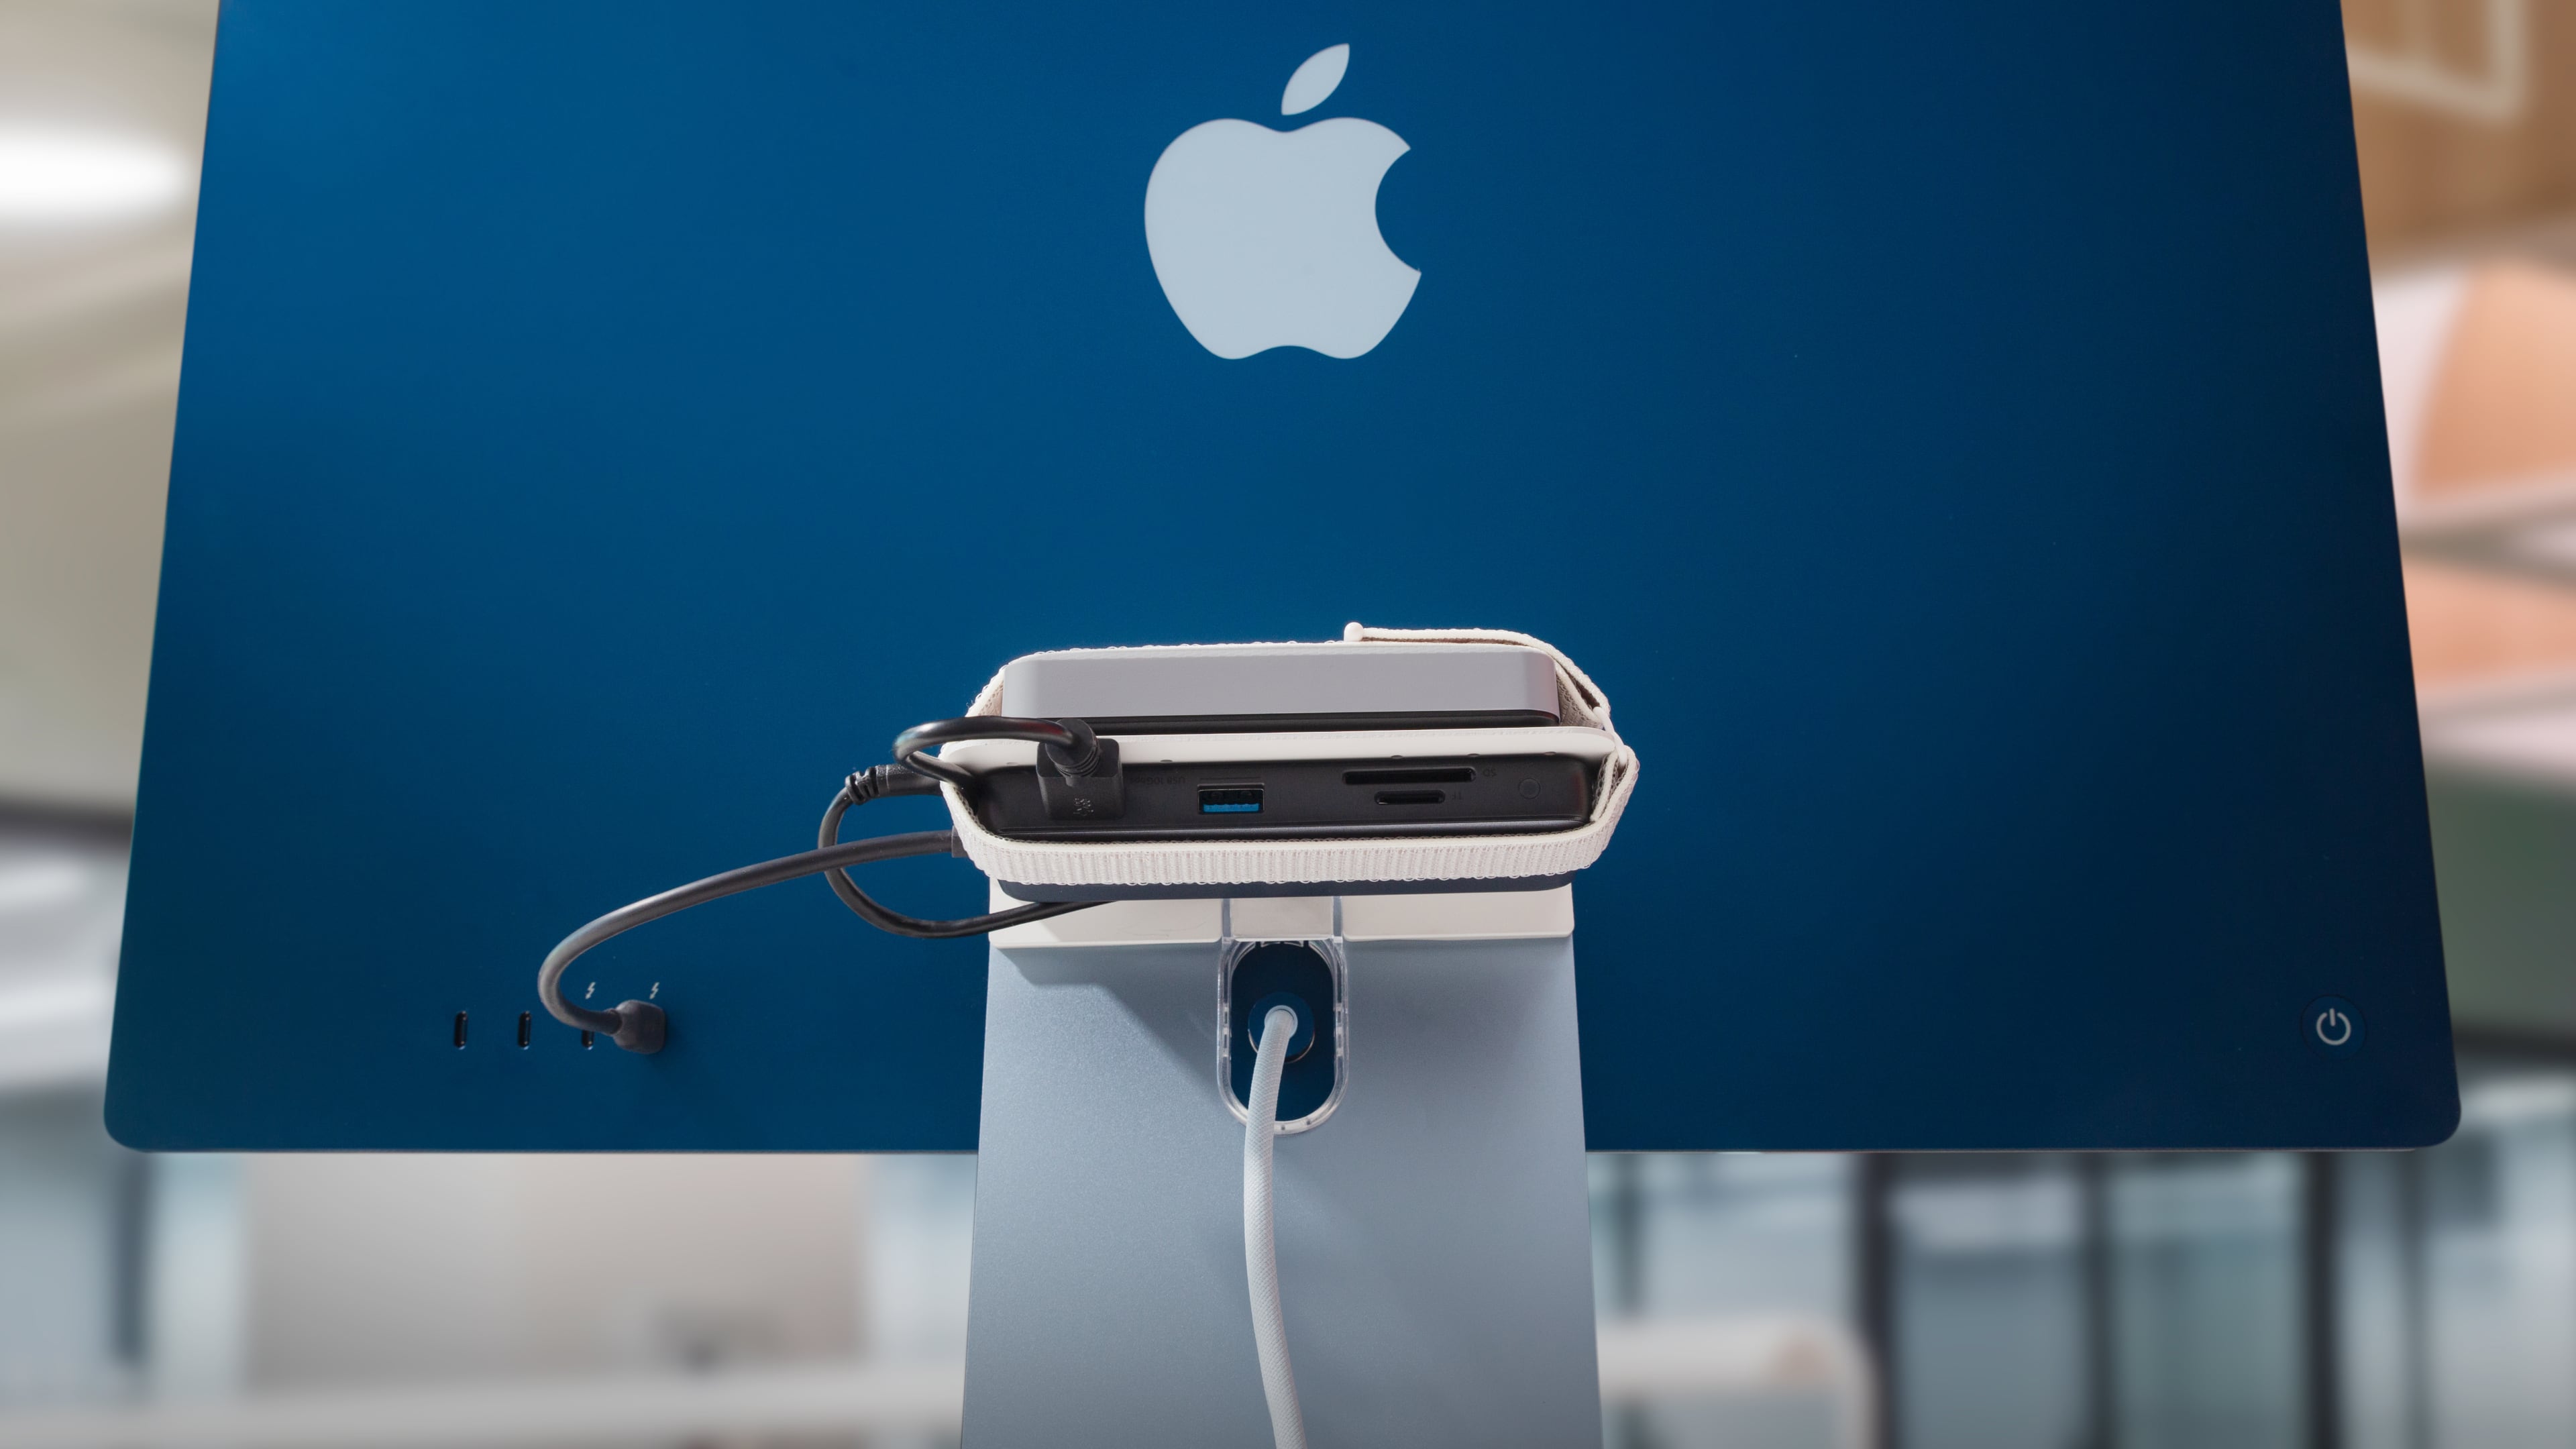 Twelve South's BackPack shelf attached to the iMac stand